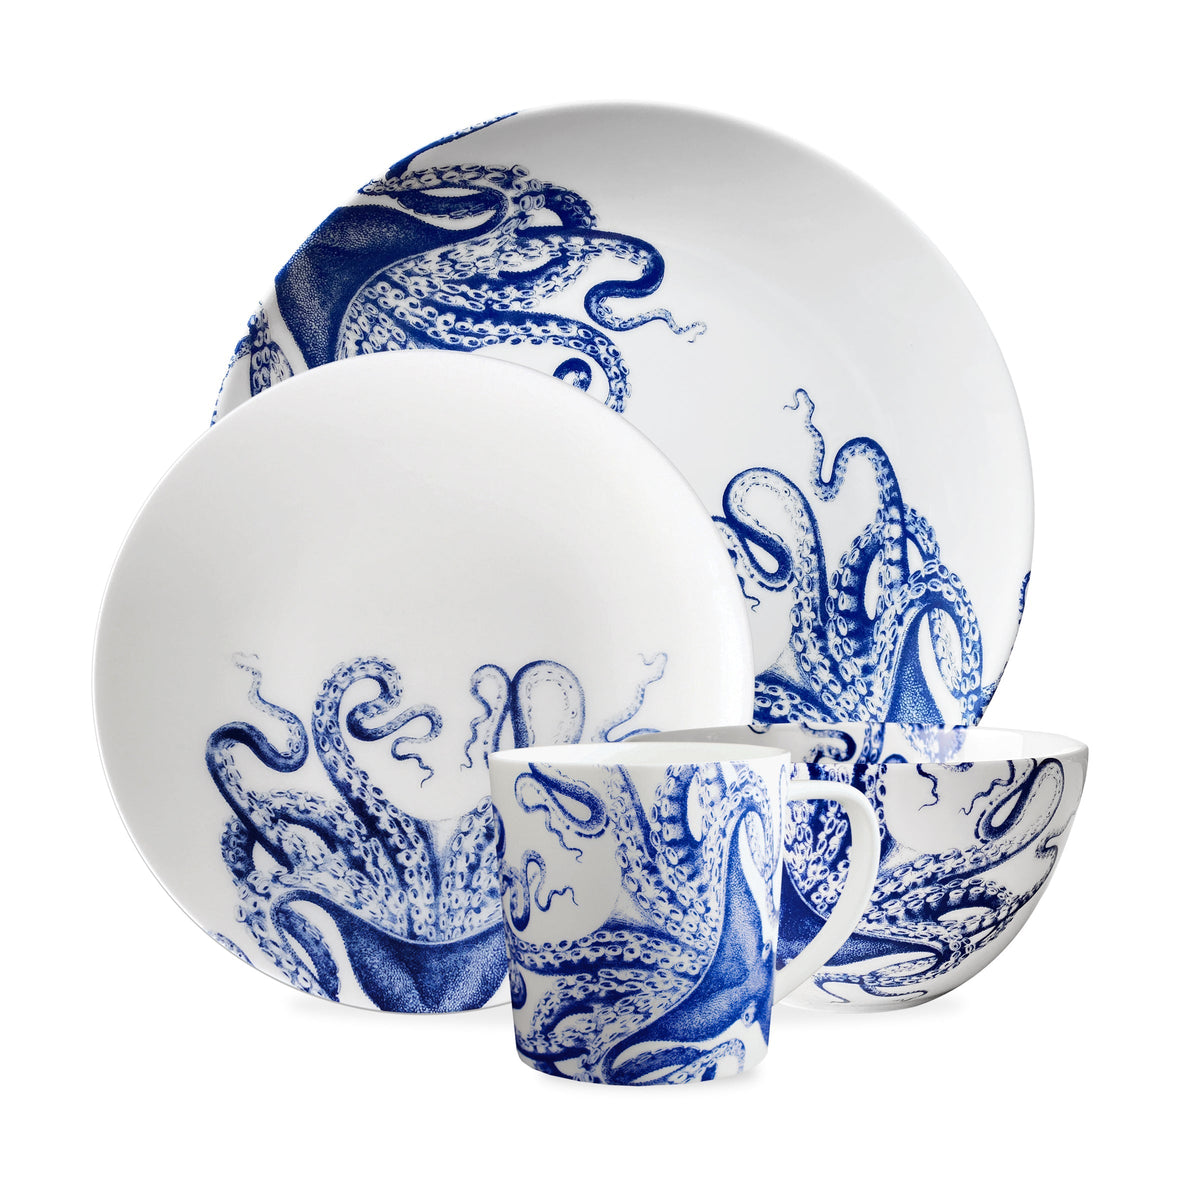 A whimsical Lucy Blue Coupe Dinner Plate set crafted with premium porcelain by Caskata Artisanal Home.